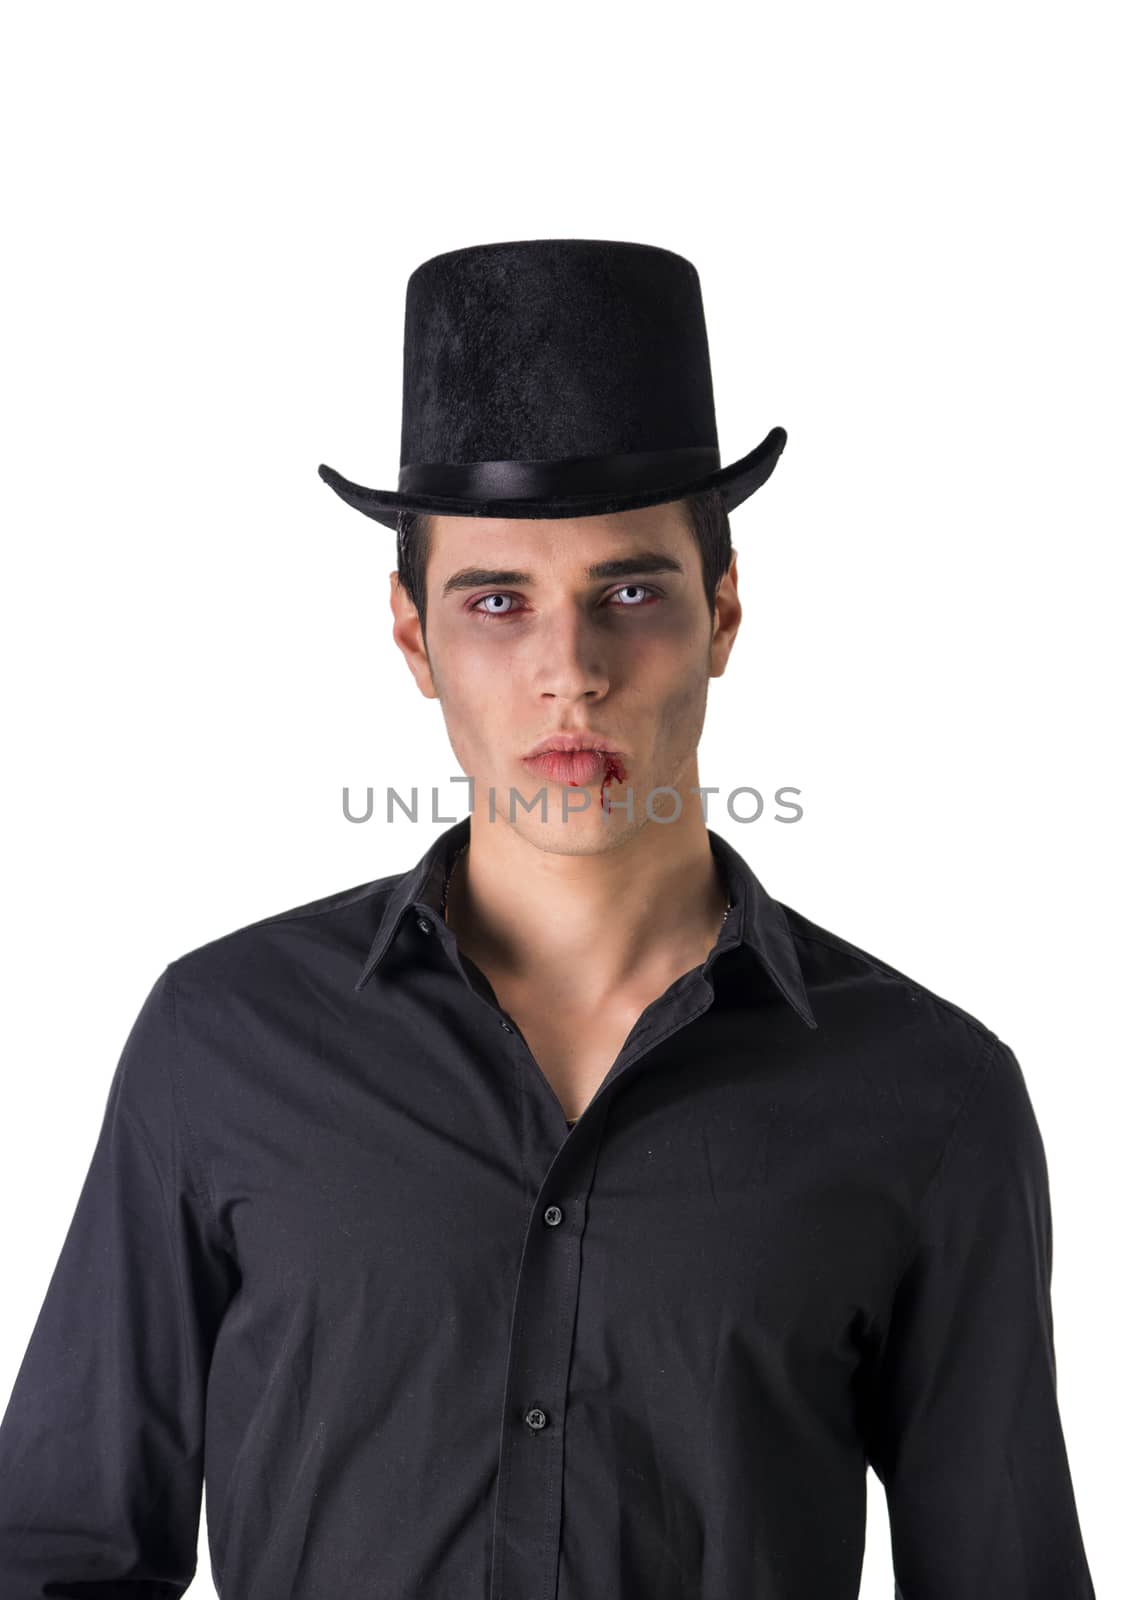 Portrait of a Young Vampire Man with High Hat and Black T-Shirt, Looking at the Camera, Isolated on White Background.